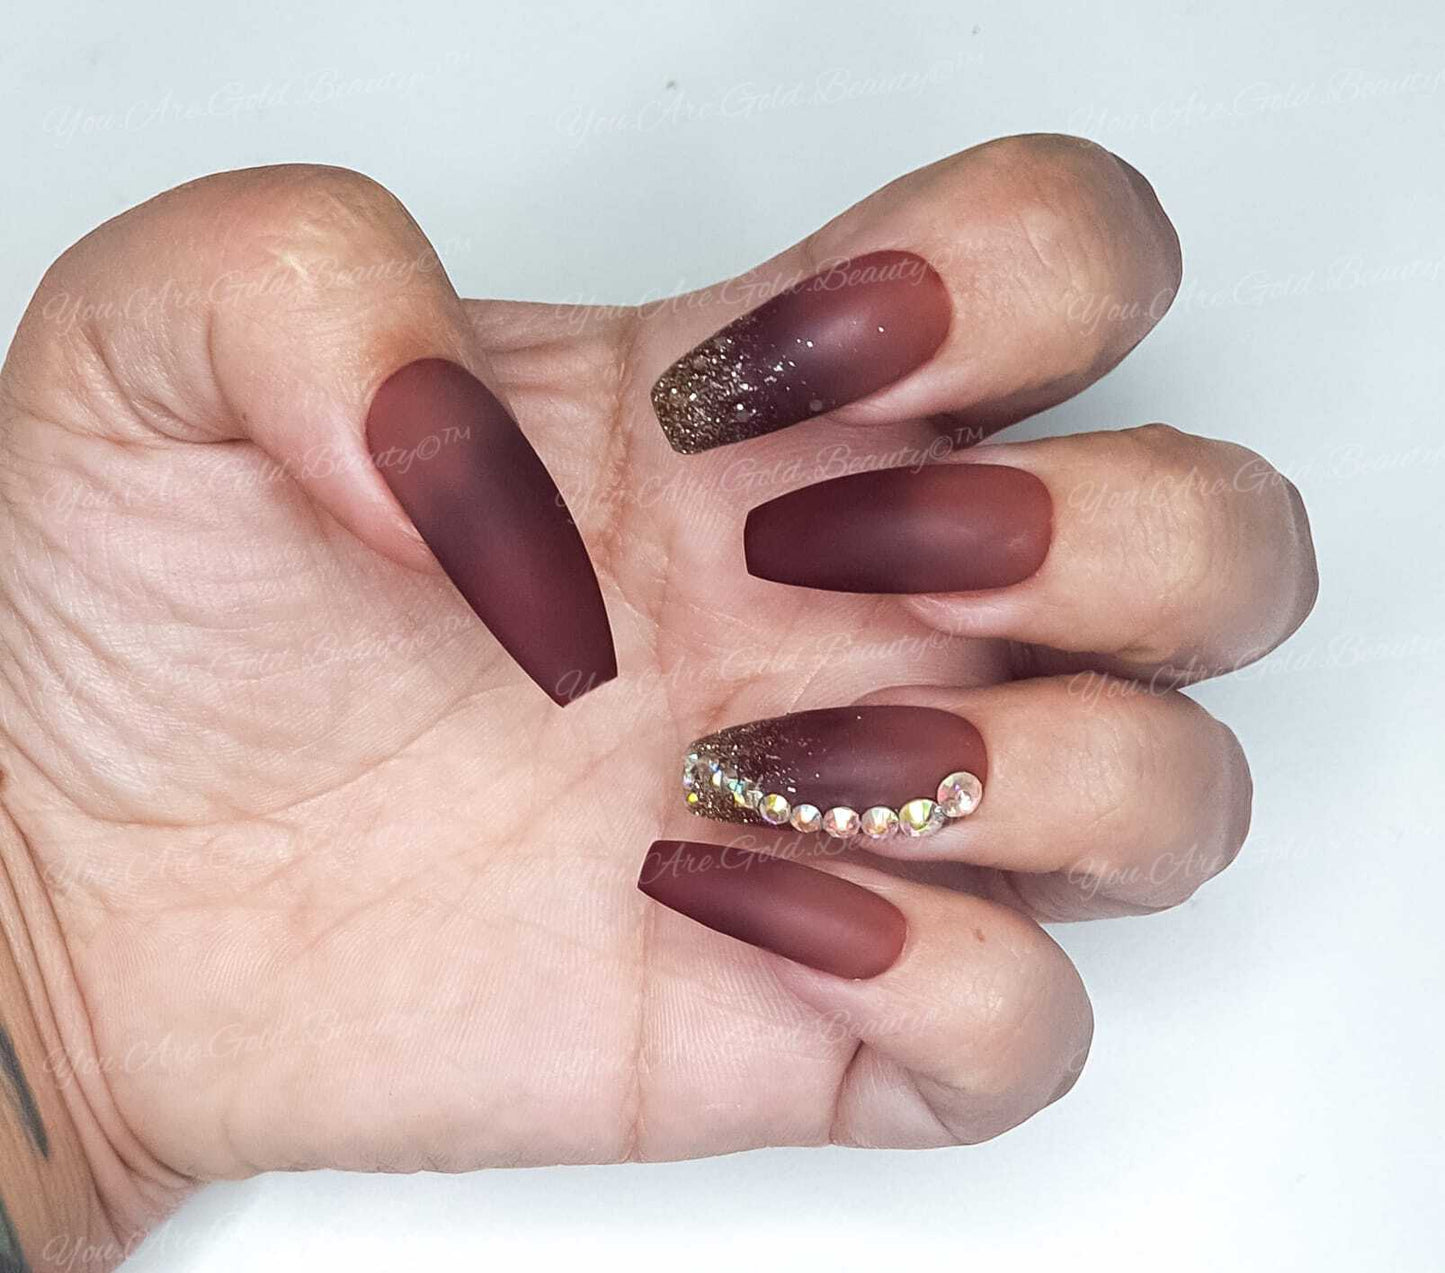 Thermal nails Colour Changing nails Coffin Shaped nails ballerina shape nails Matte Chocolate Brown nails Press On Nails with Gold Glitter and Rhinestone Diamante.  brown nails designs 